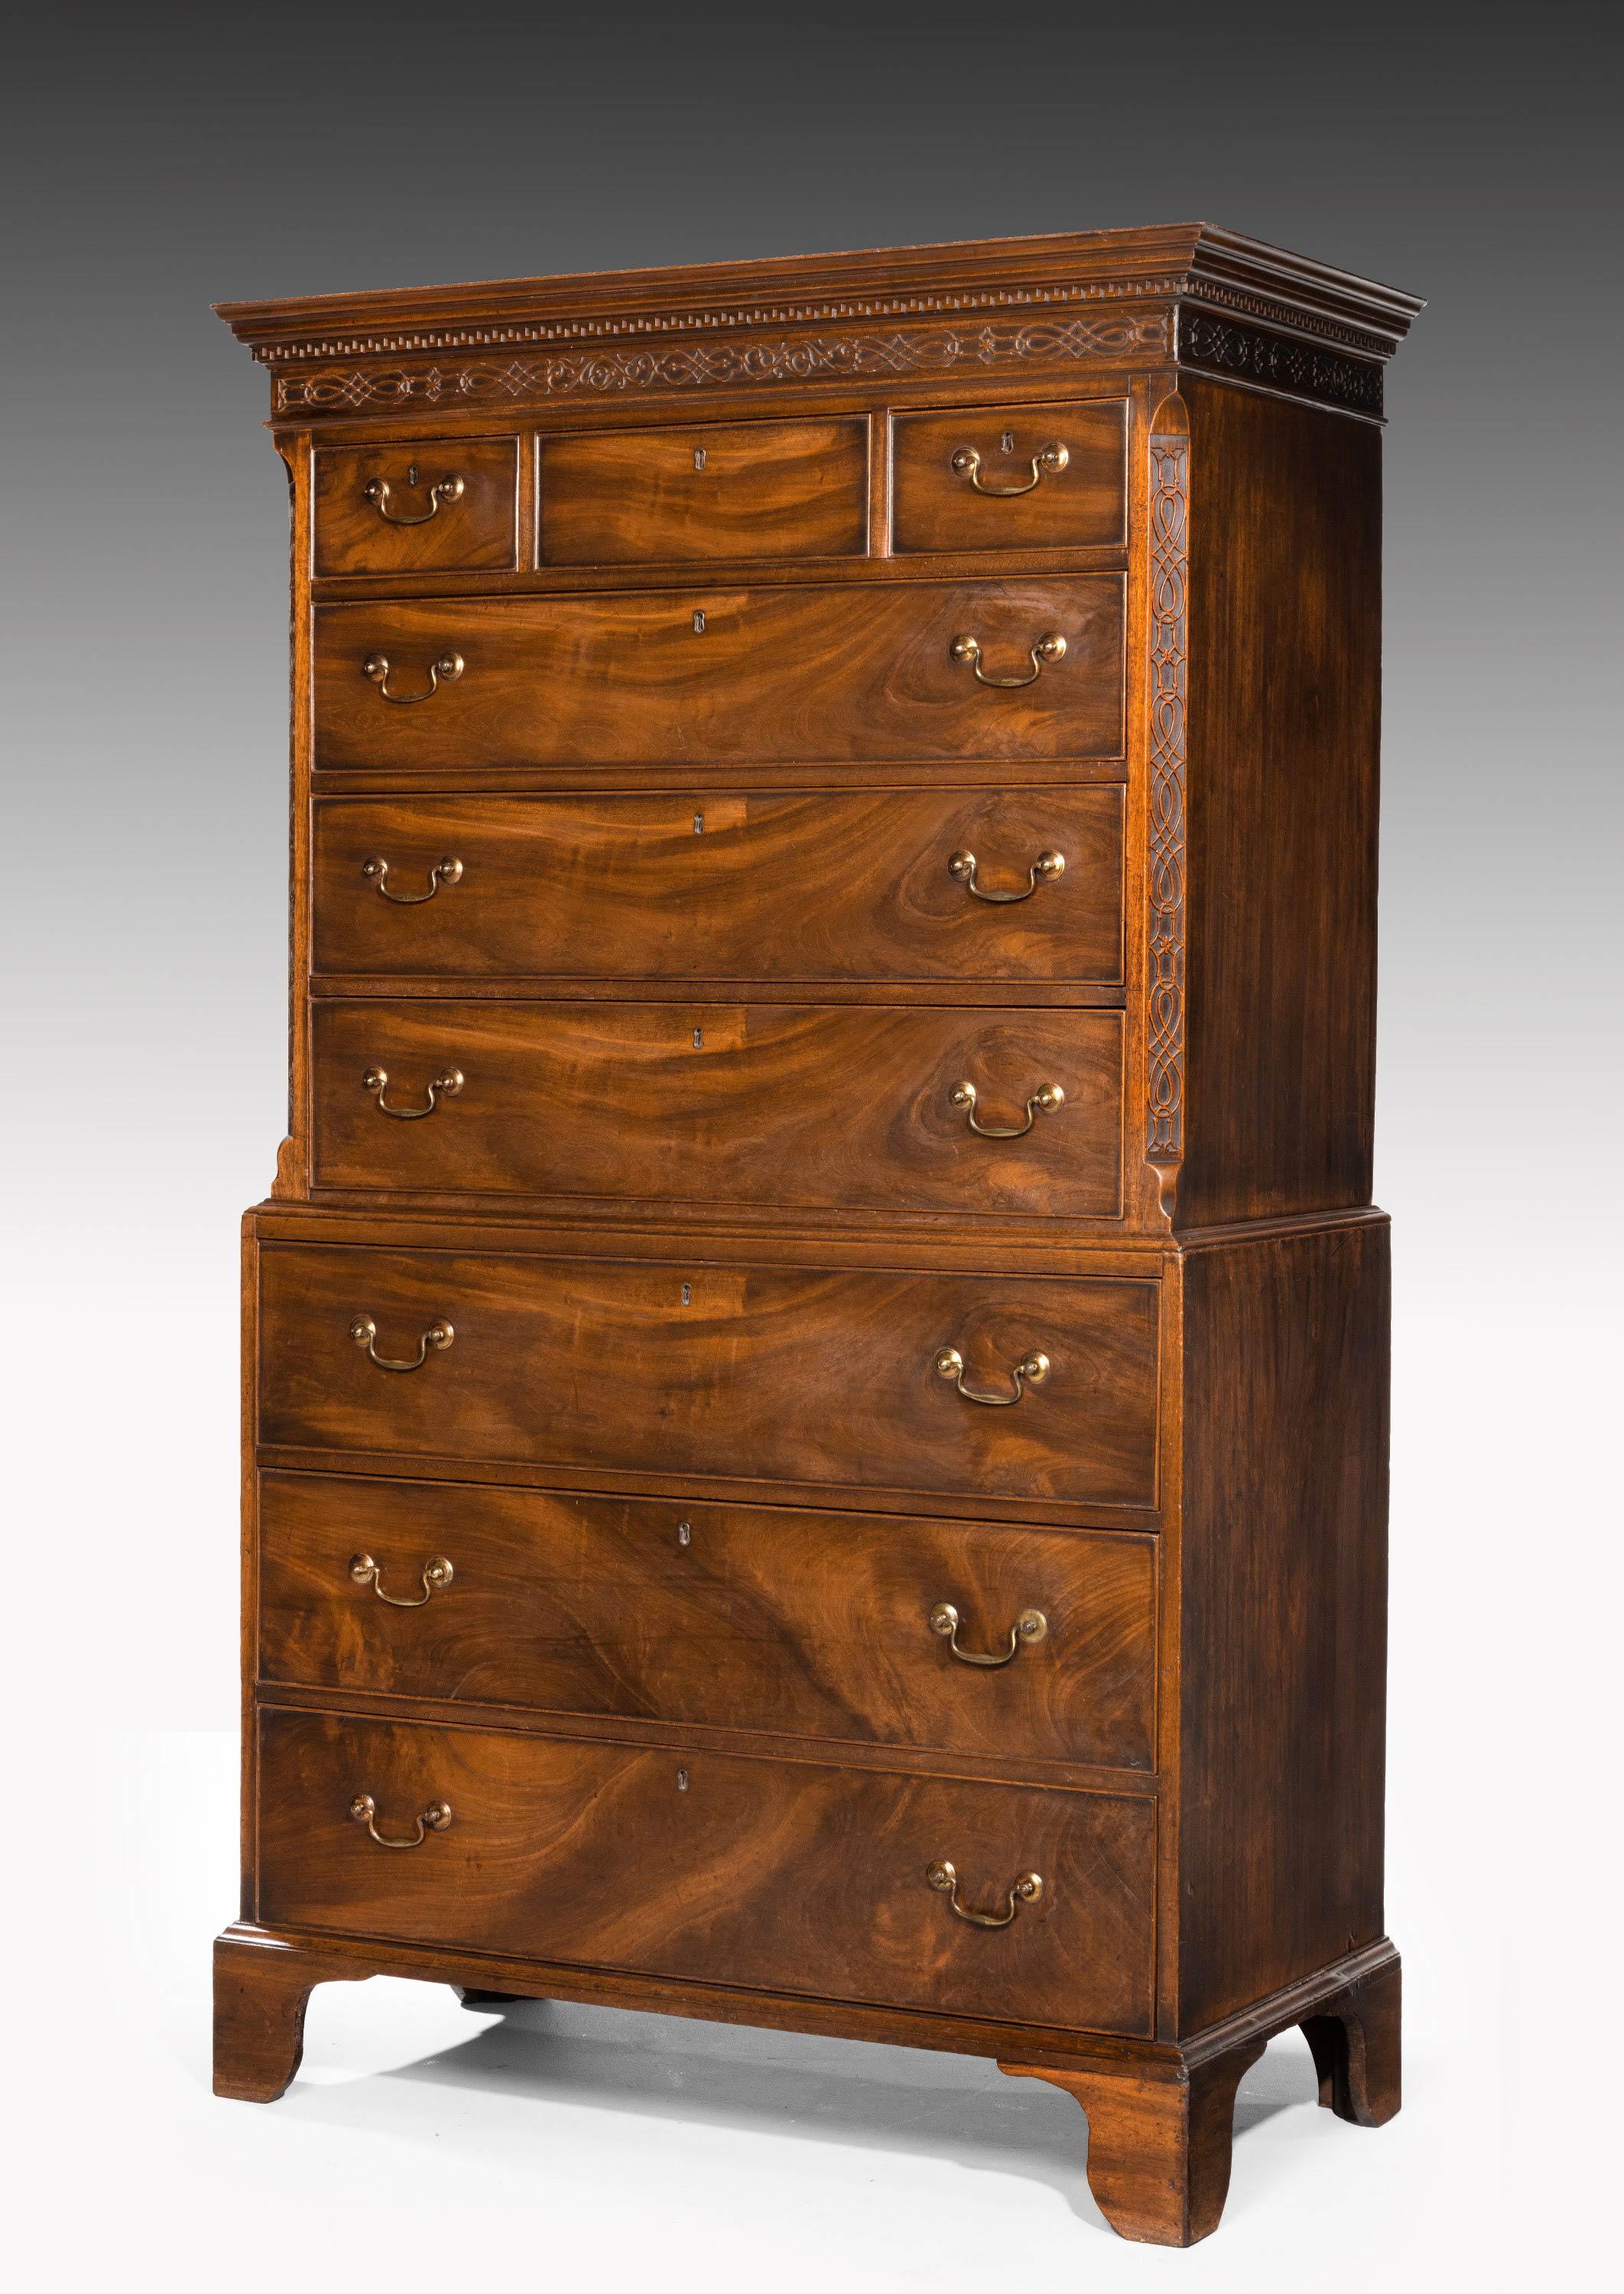 A particularly fine Chippendale period mahogany chest-on-chest. The top section with canted corners and the border with the finest quality blind fret carving over a Grecian deep patination. Find period original handles retaining the gilding. The